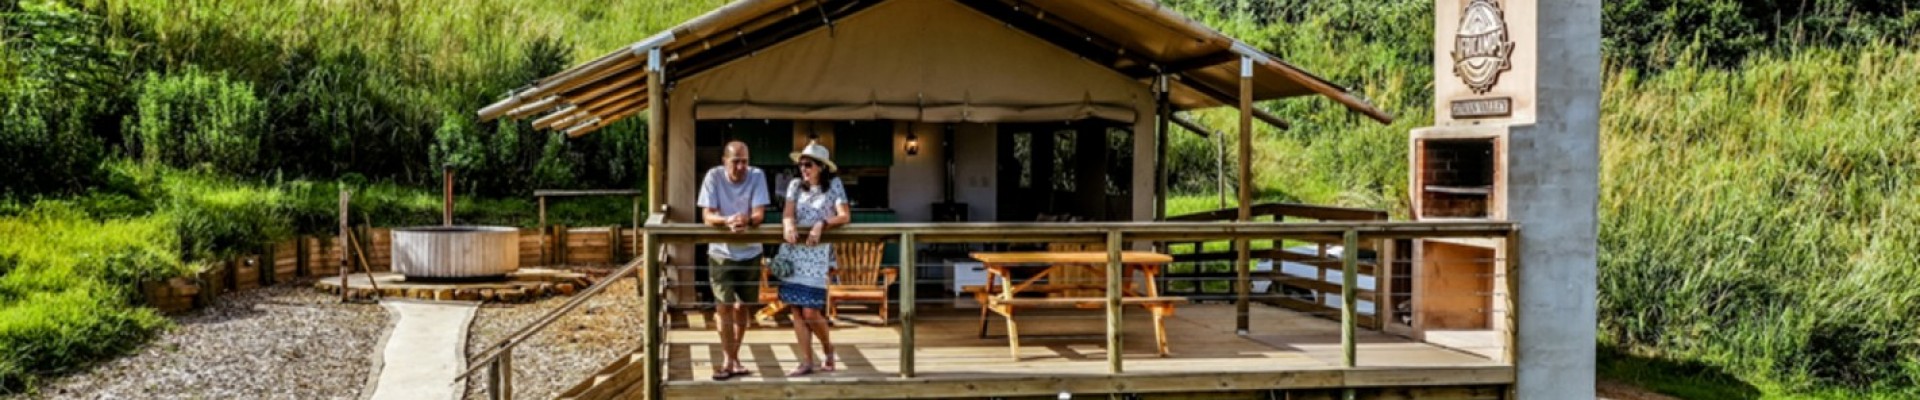 AfriCamps at Gowan Valley - The Midlands Package (2 Nights)